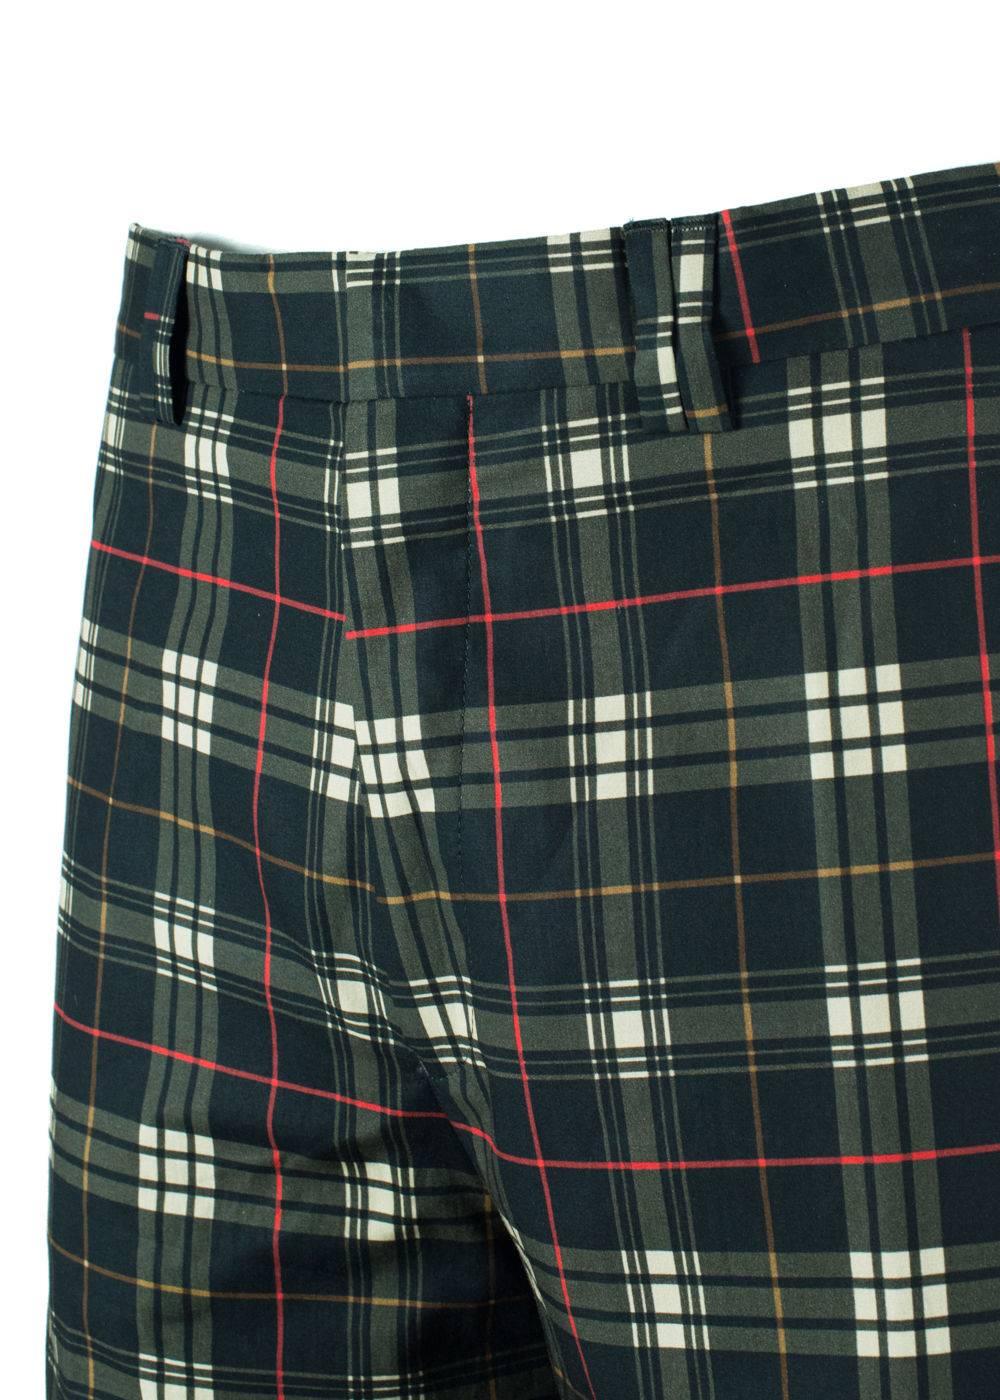 Brand New Givenchy Men's Shorts
Original Tags
Retails in Stores & Online for $510
Men's Size E52 / US36 Fits True to Size

Givenchy board shorts with a black, white and red color plaid pattern throughout the bottom. Perfect for this season with its